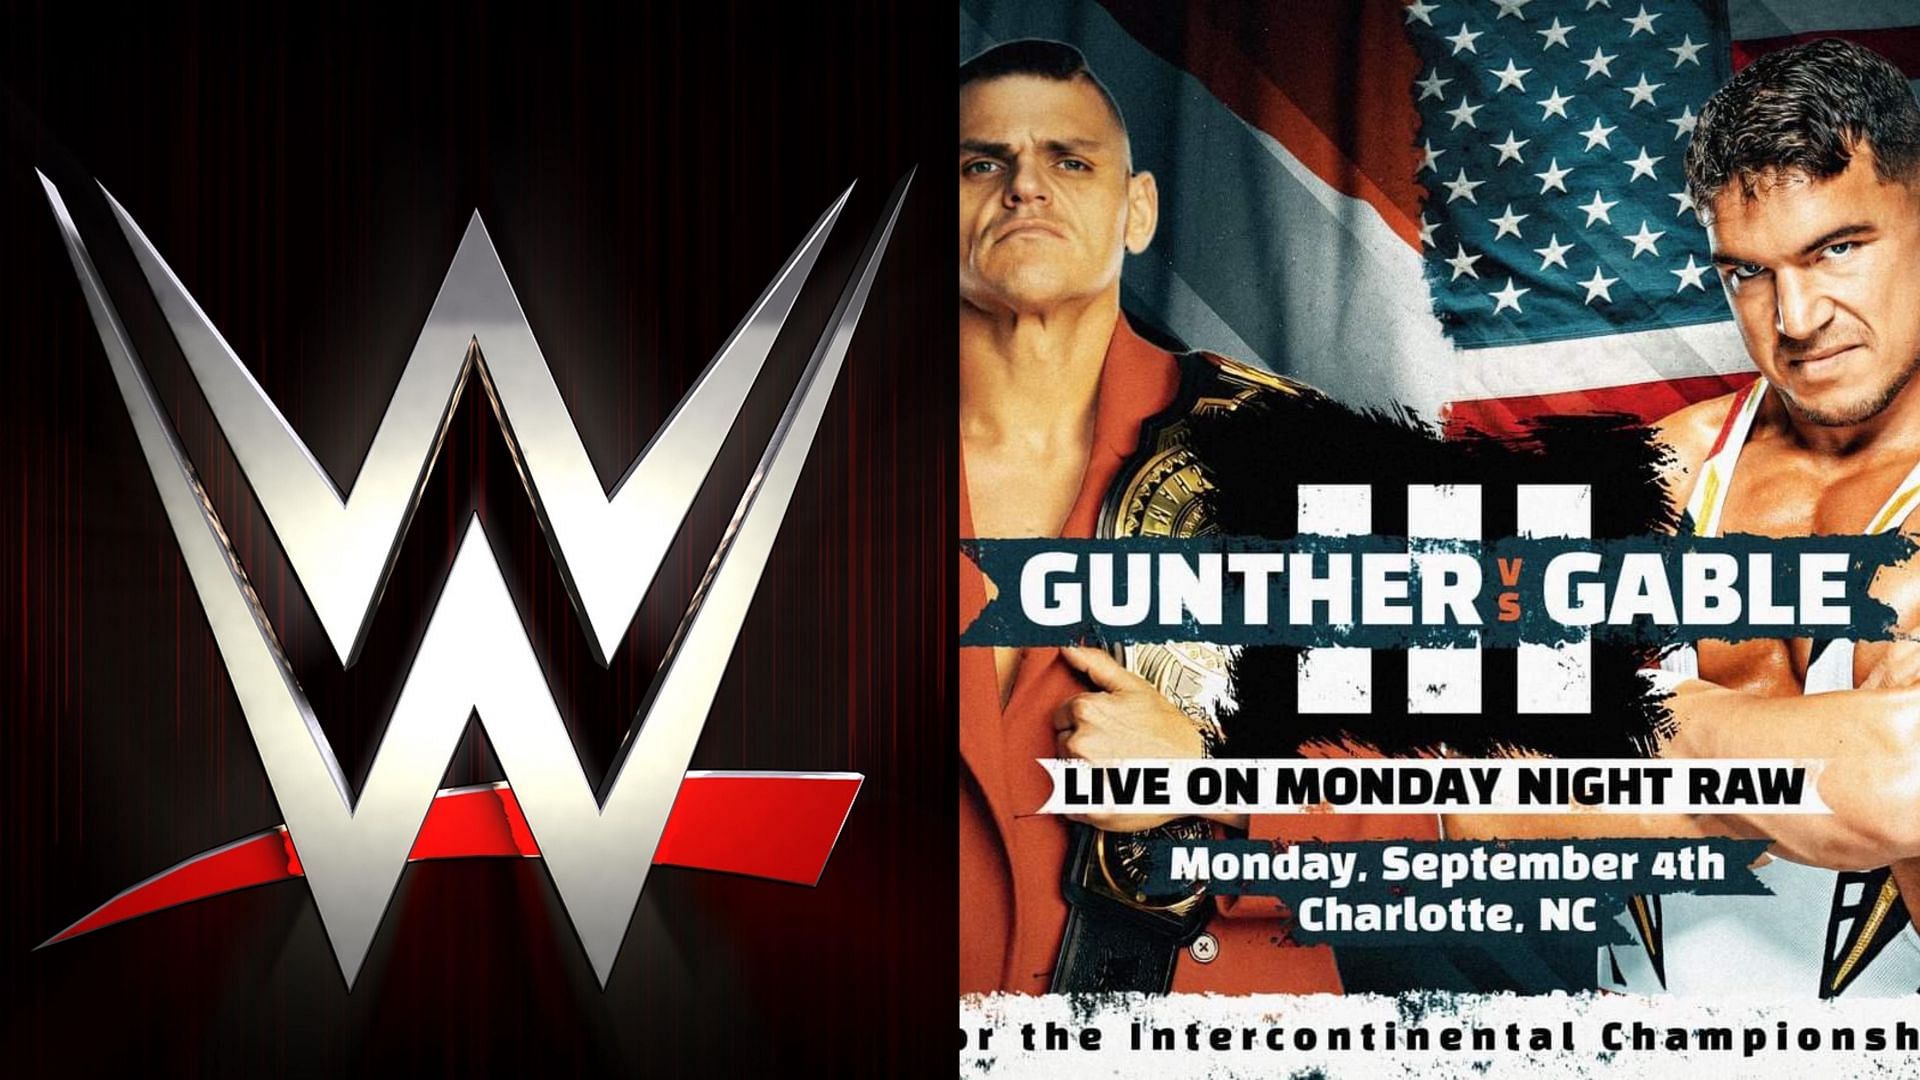 Will Gunther become the longest reigning Intercontinental Champion of all time? 